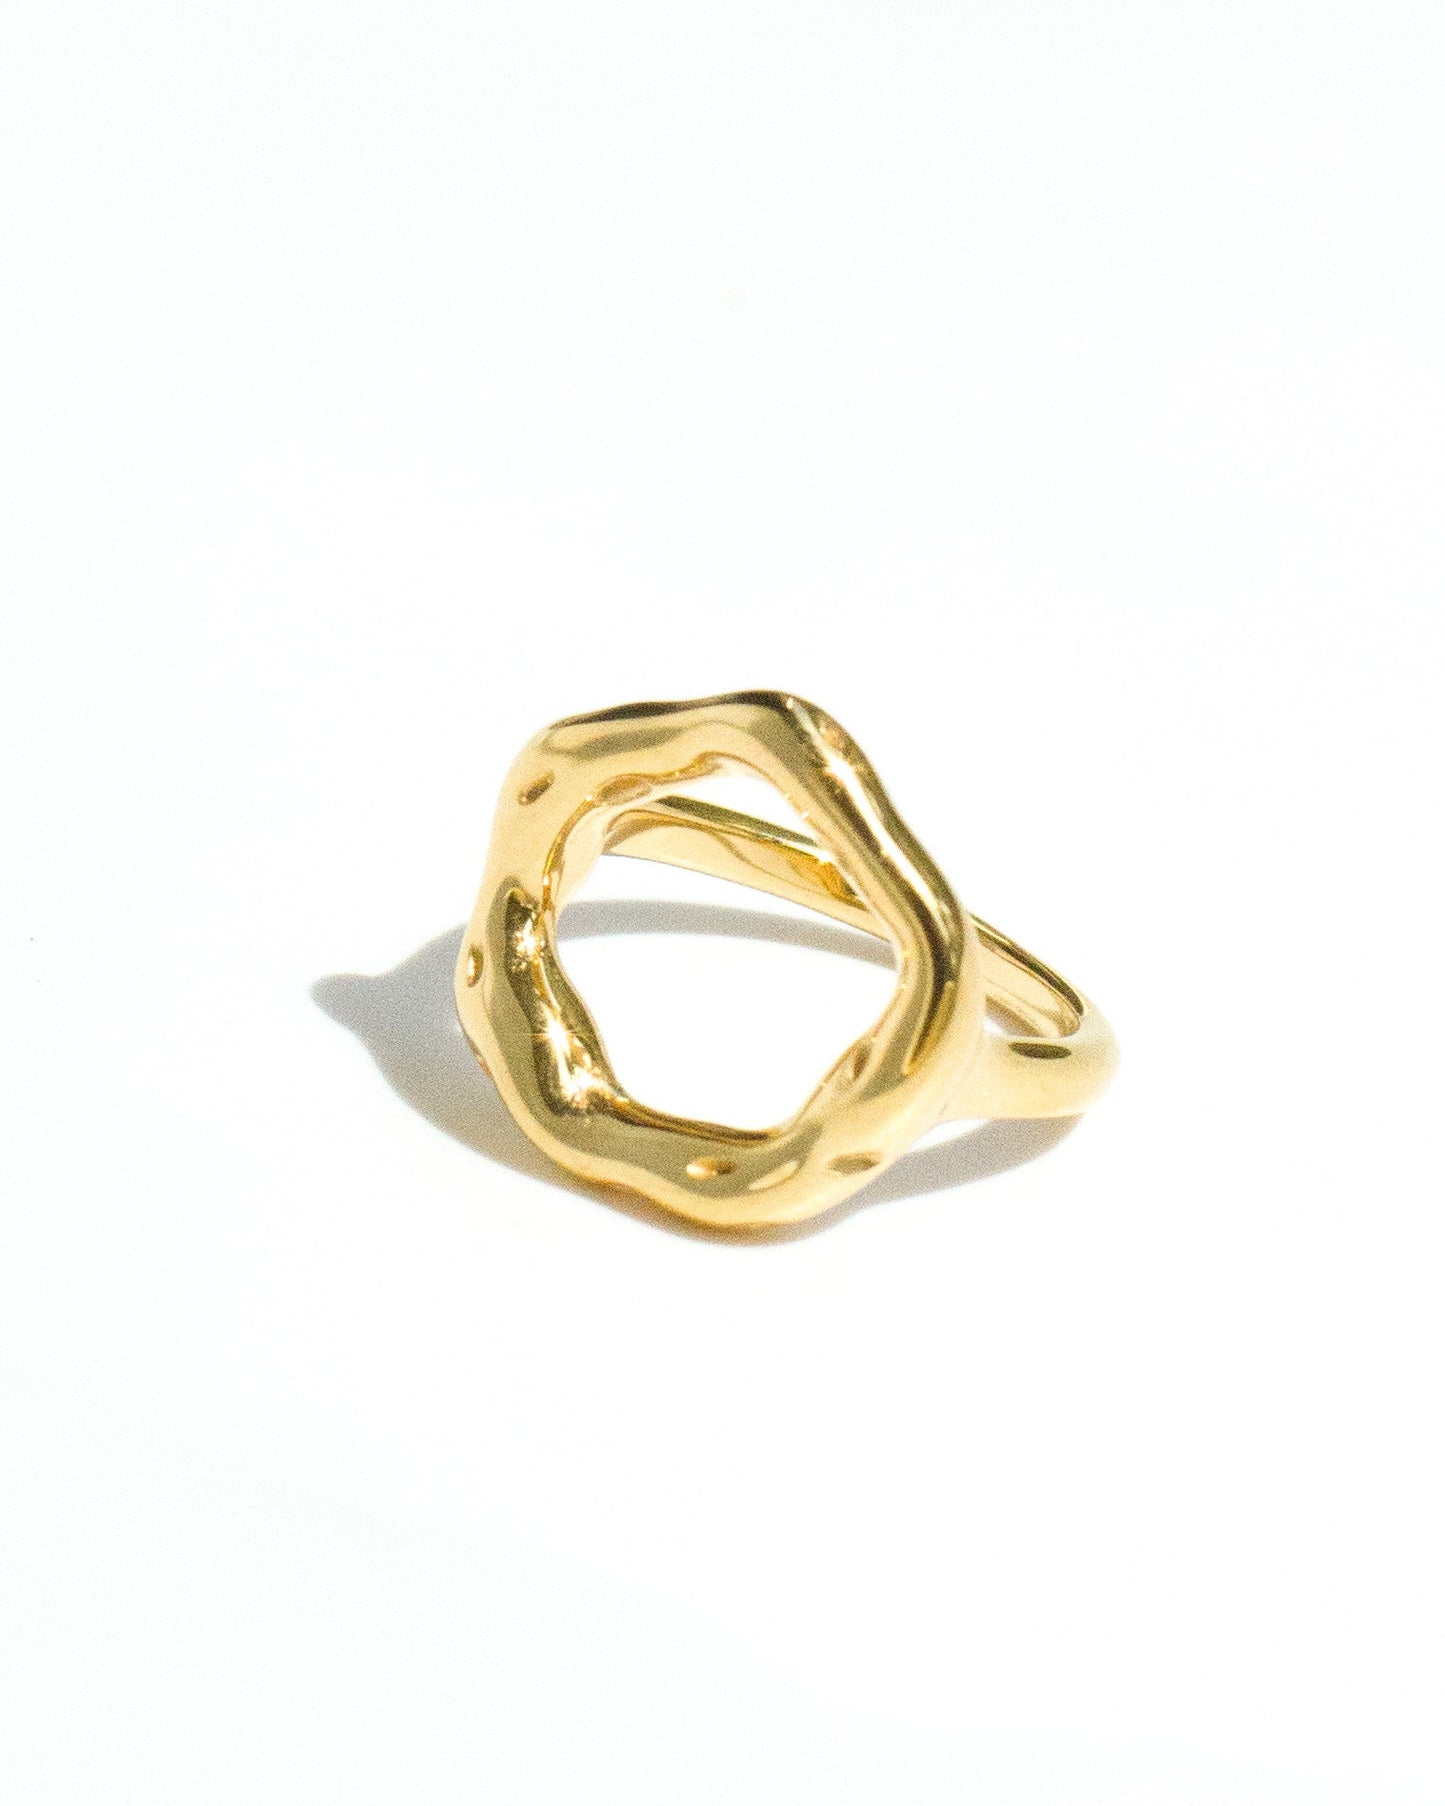 UNITY RING - DE.FINE Collection Jewelry